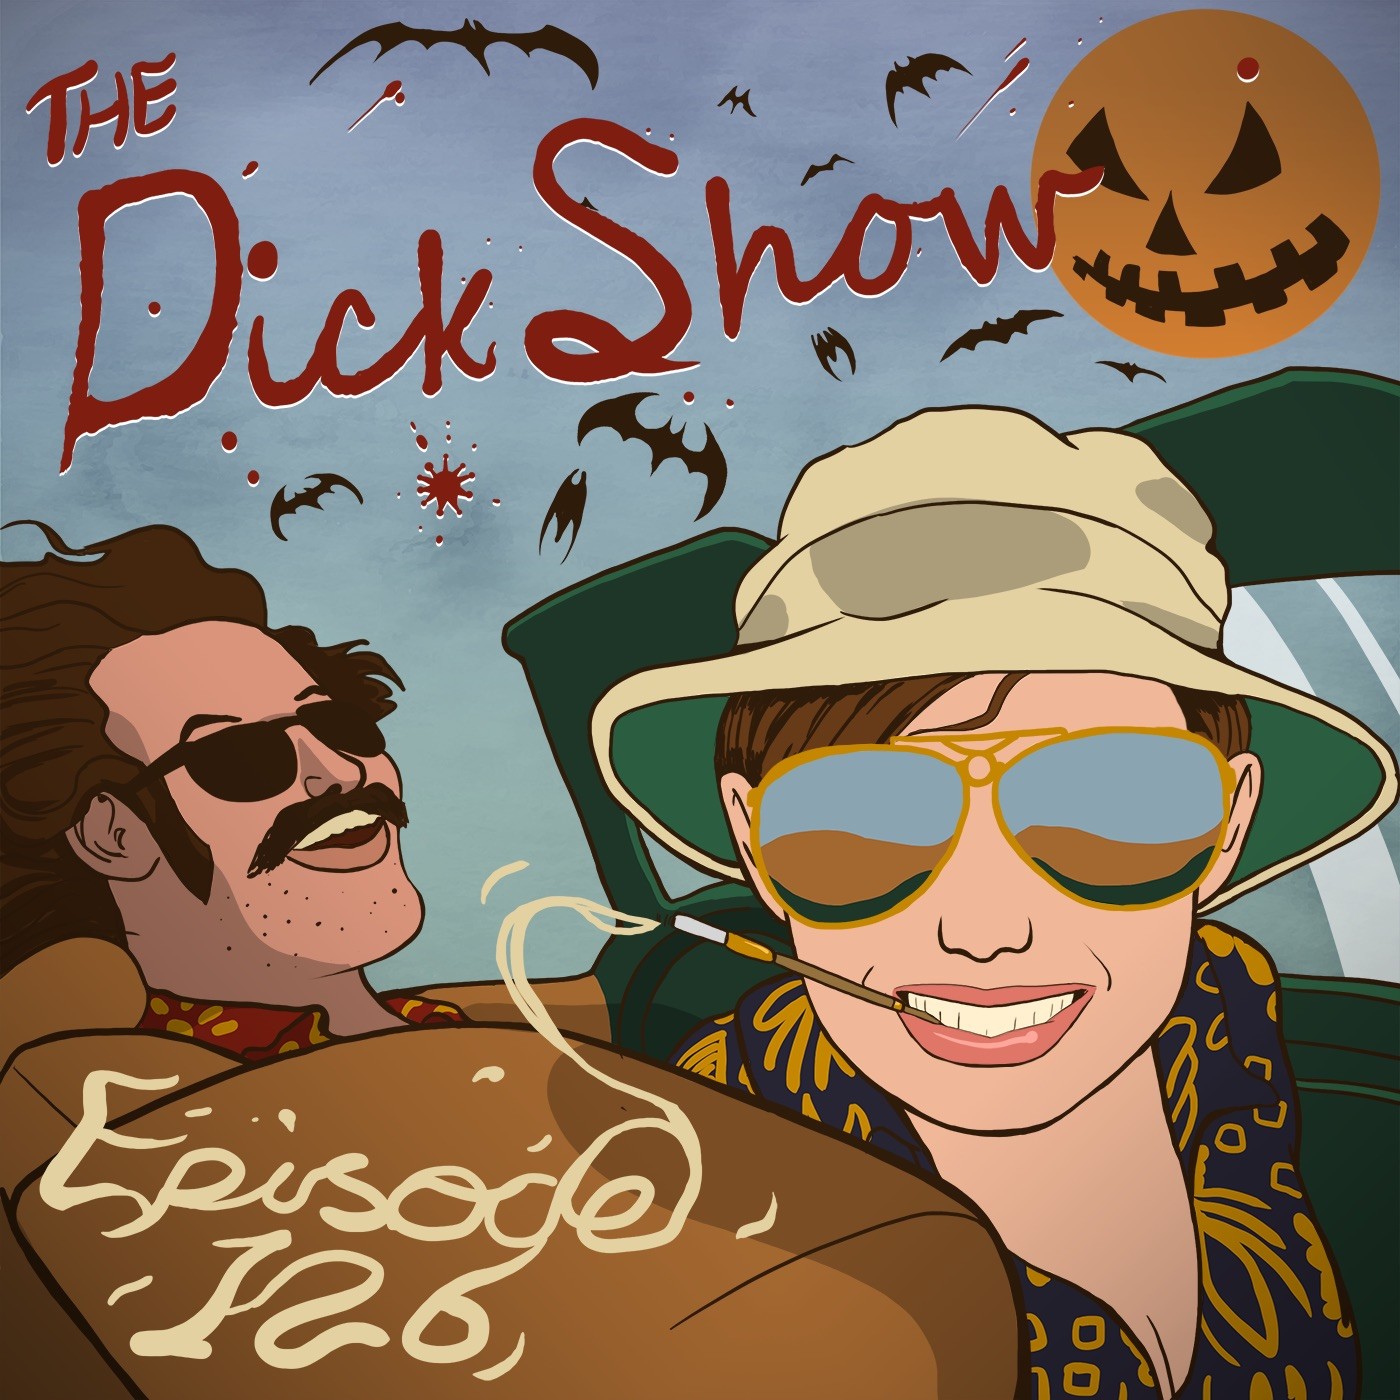 The dick show episode 126